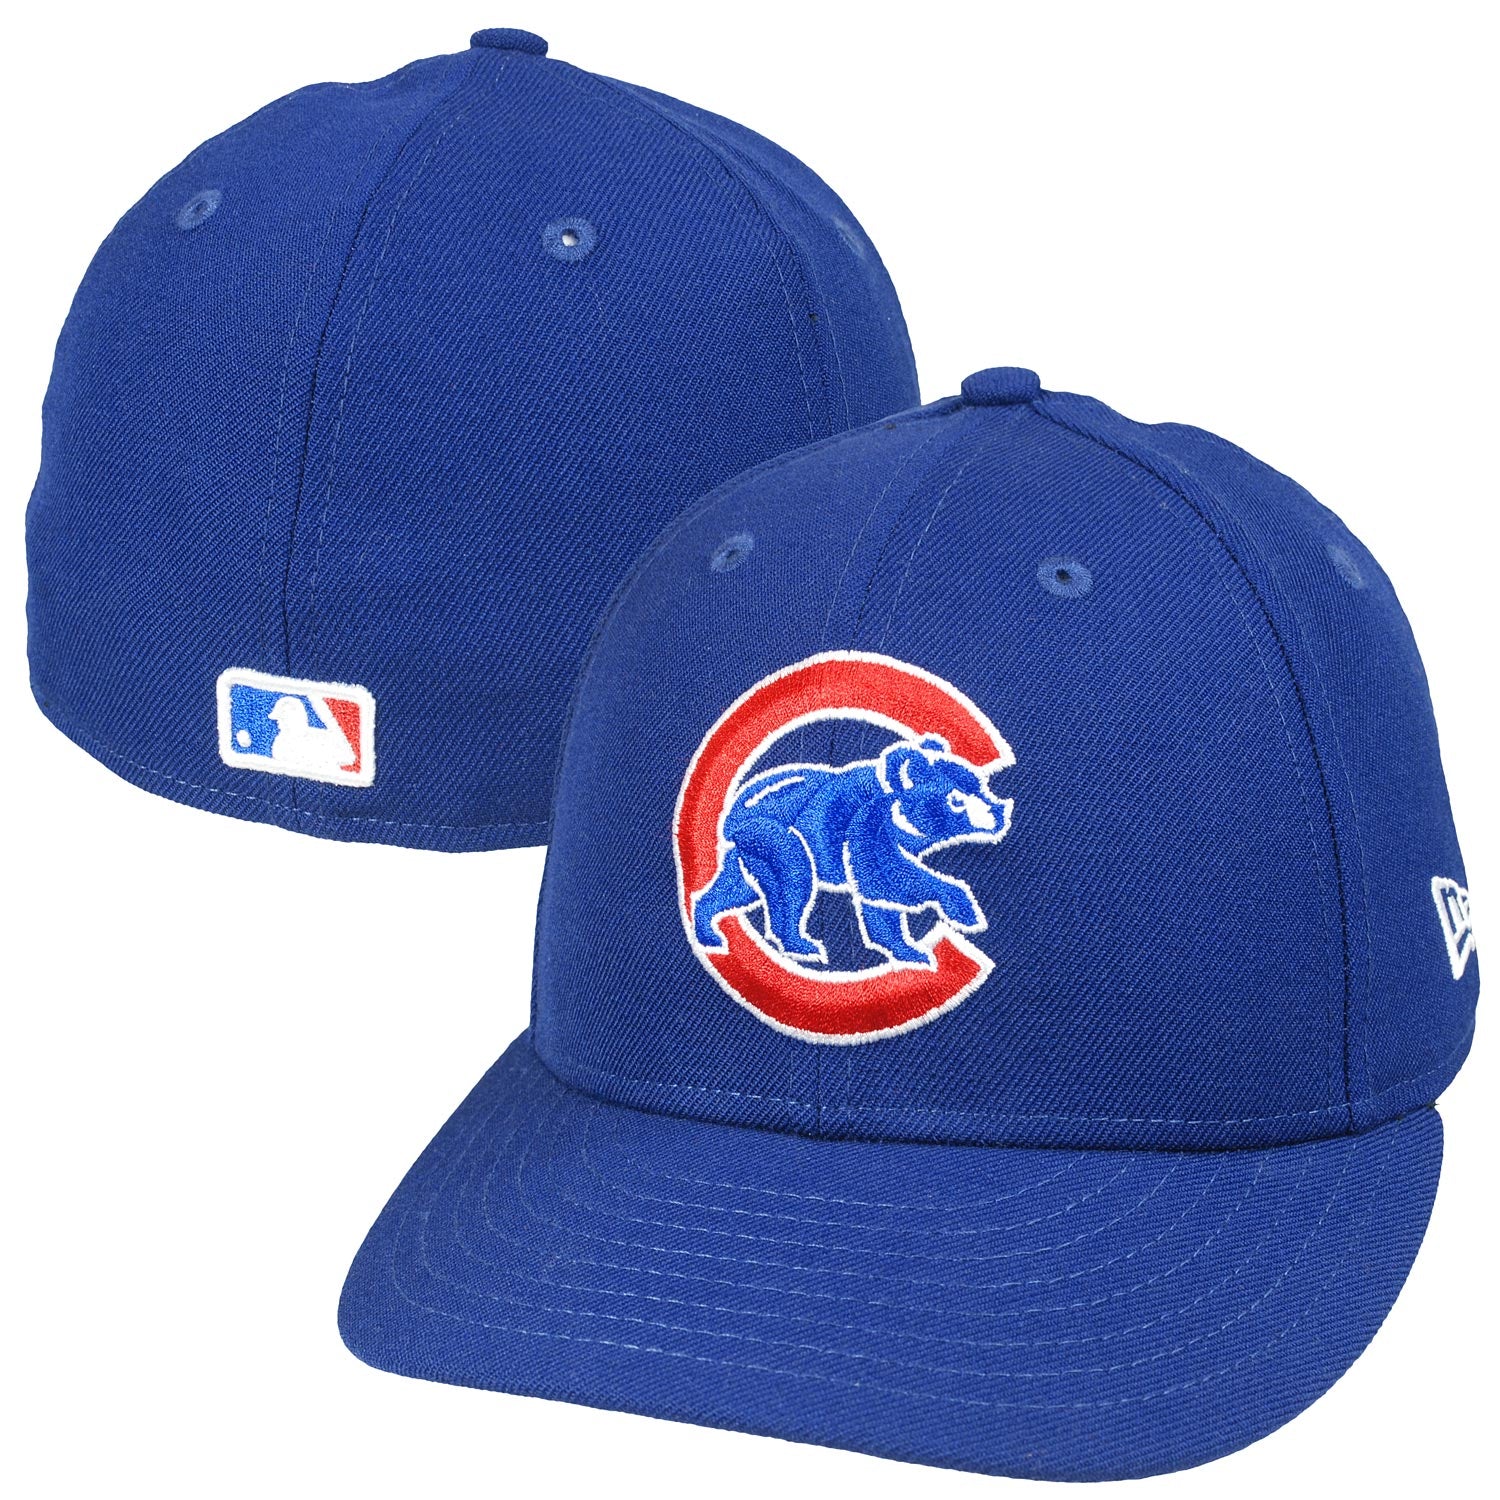 New Era Men's Chicago Cubs 59Fifty Game Royal Low Crown Authentic Hat